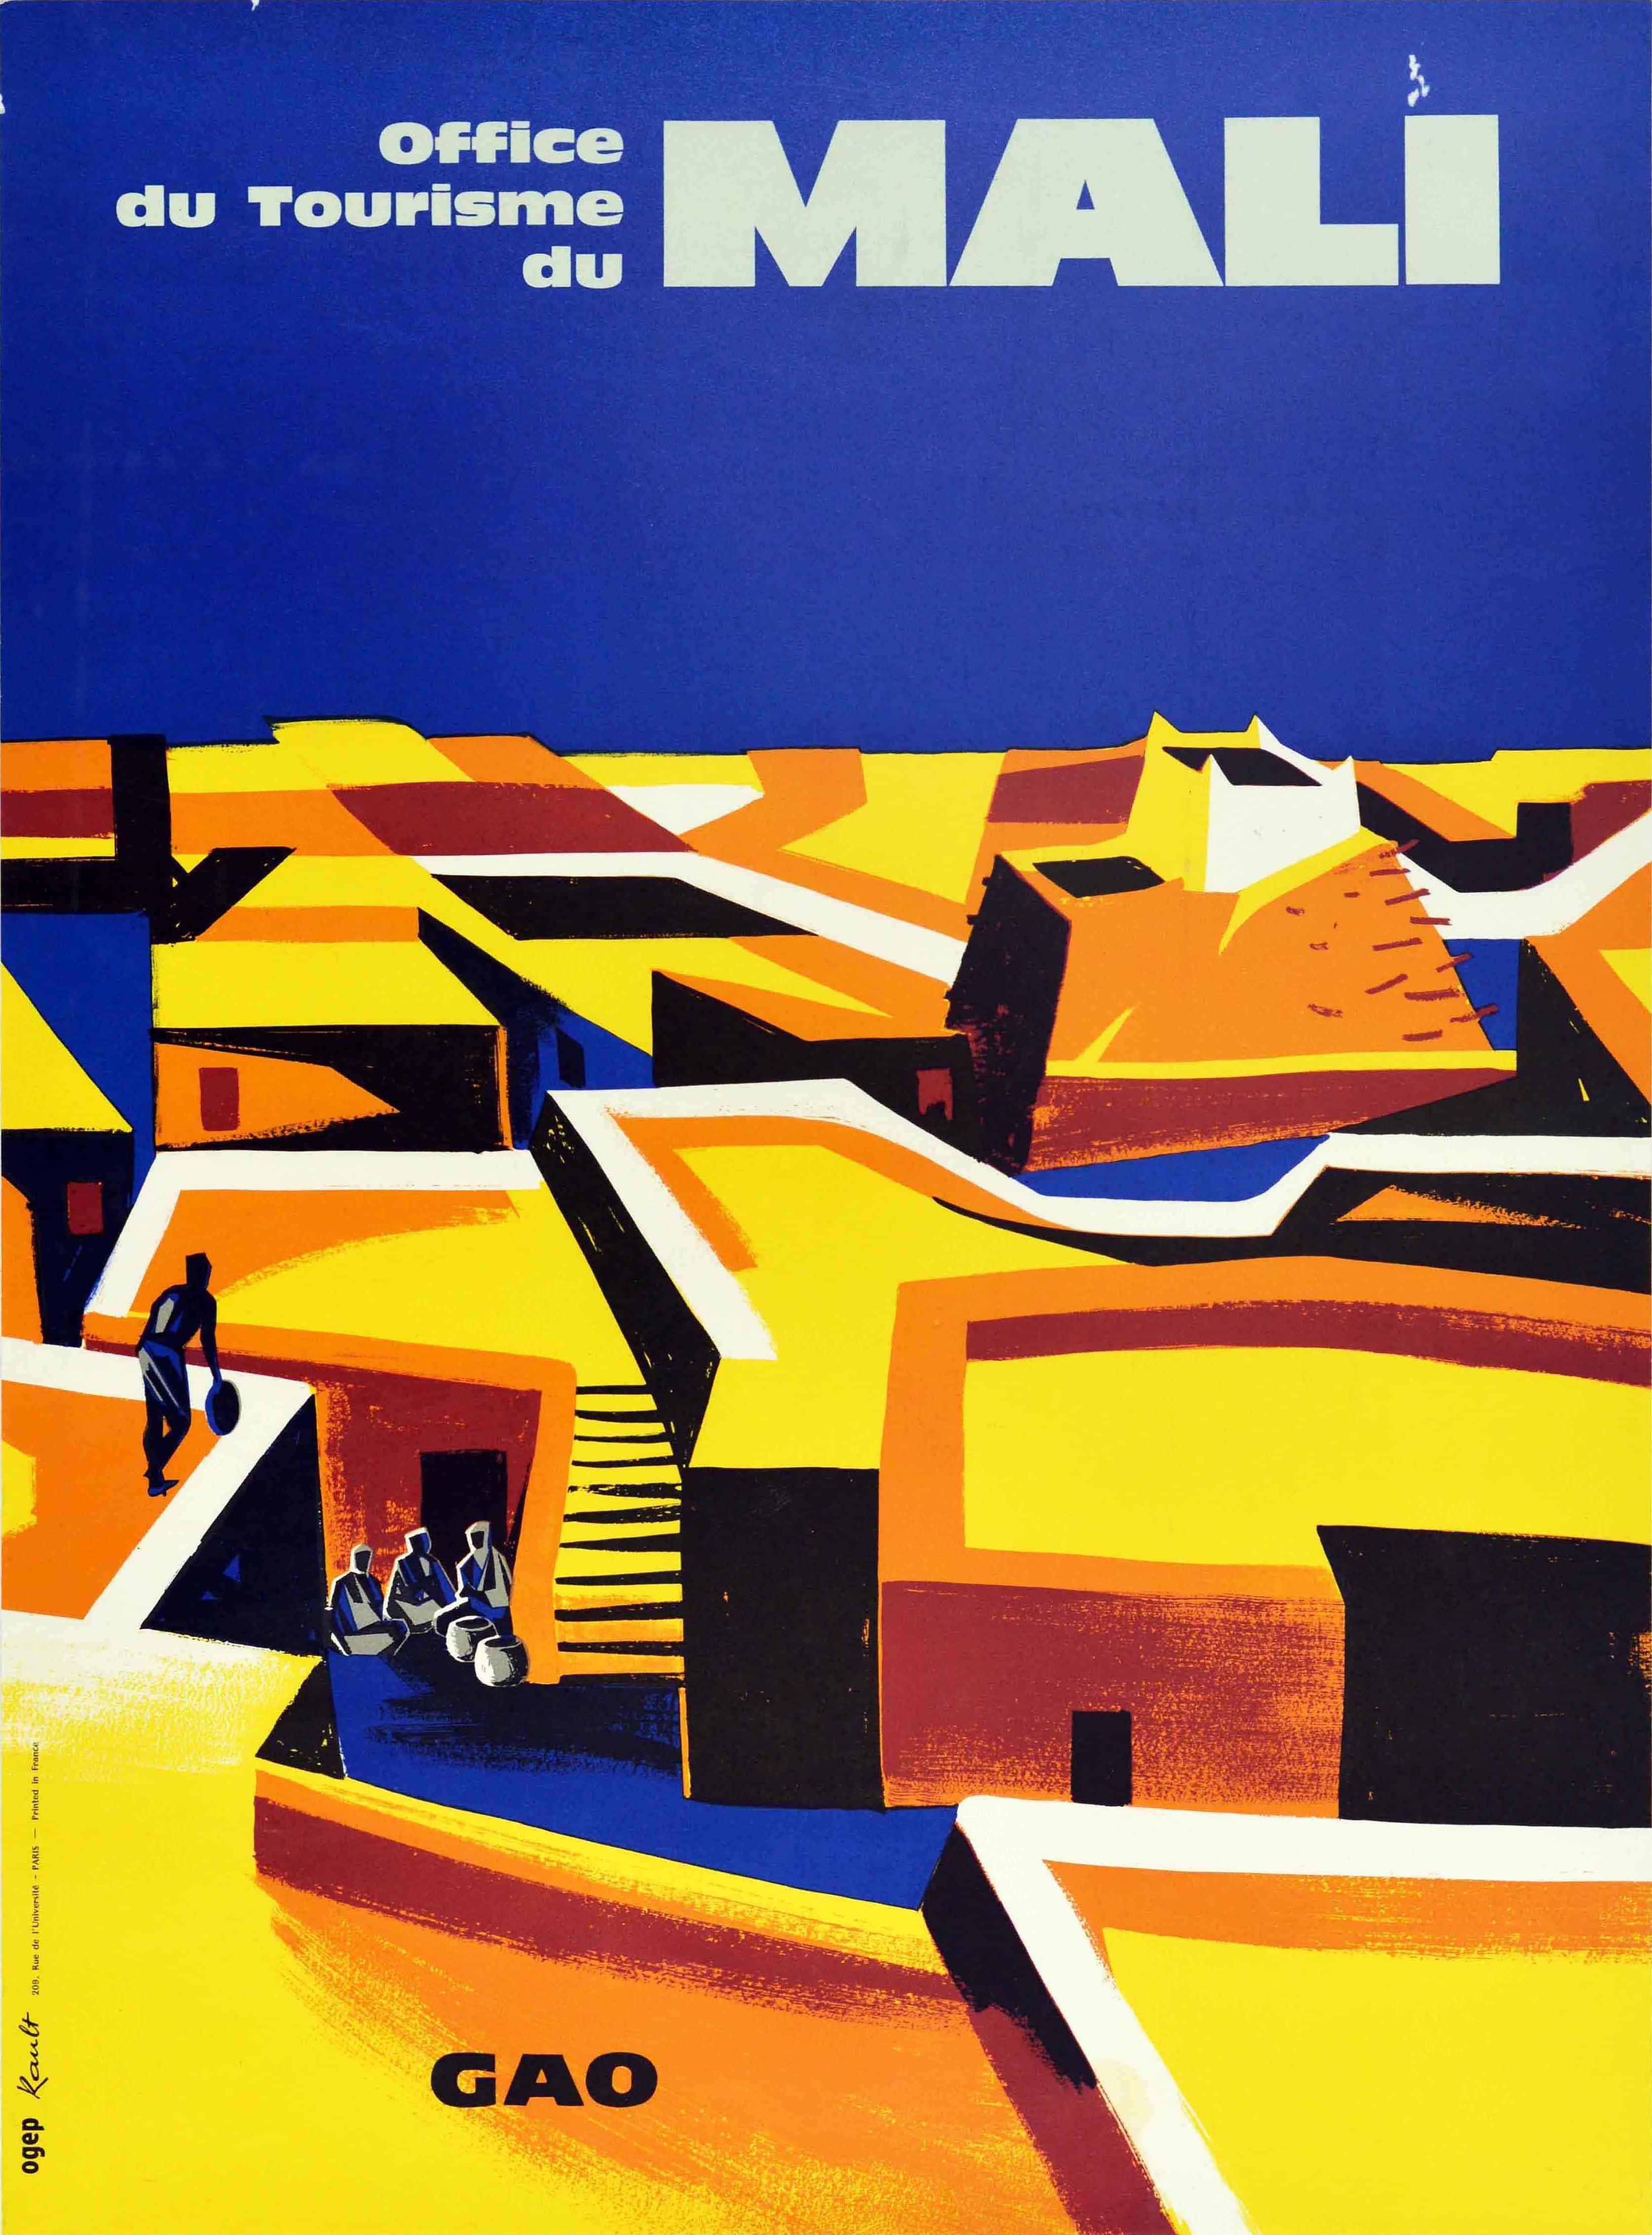 Original vintage travel poster issued by the Mali Office of Tourism and printed in France featuring a colourful illustration depicting silhouettes of people sitting in the shade with another person leaning on a roof top looking over the city of Gao